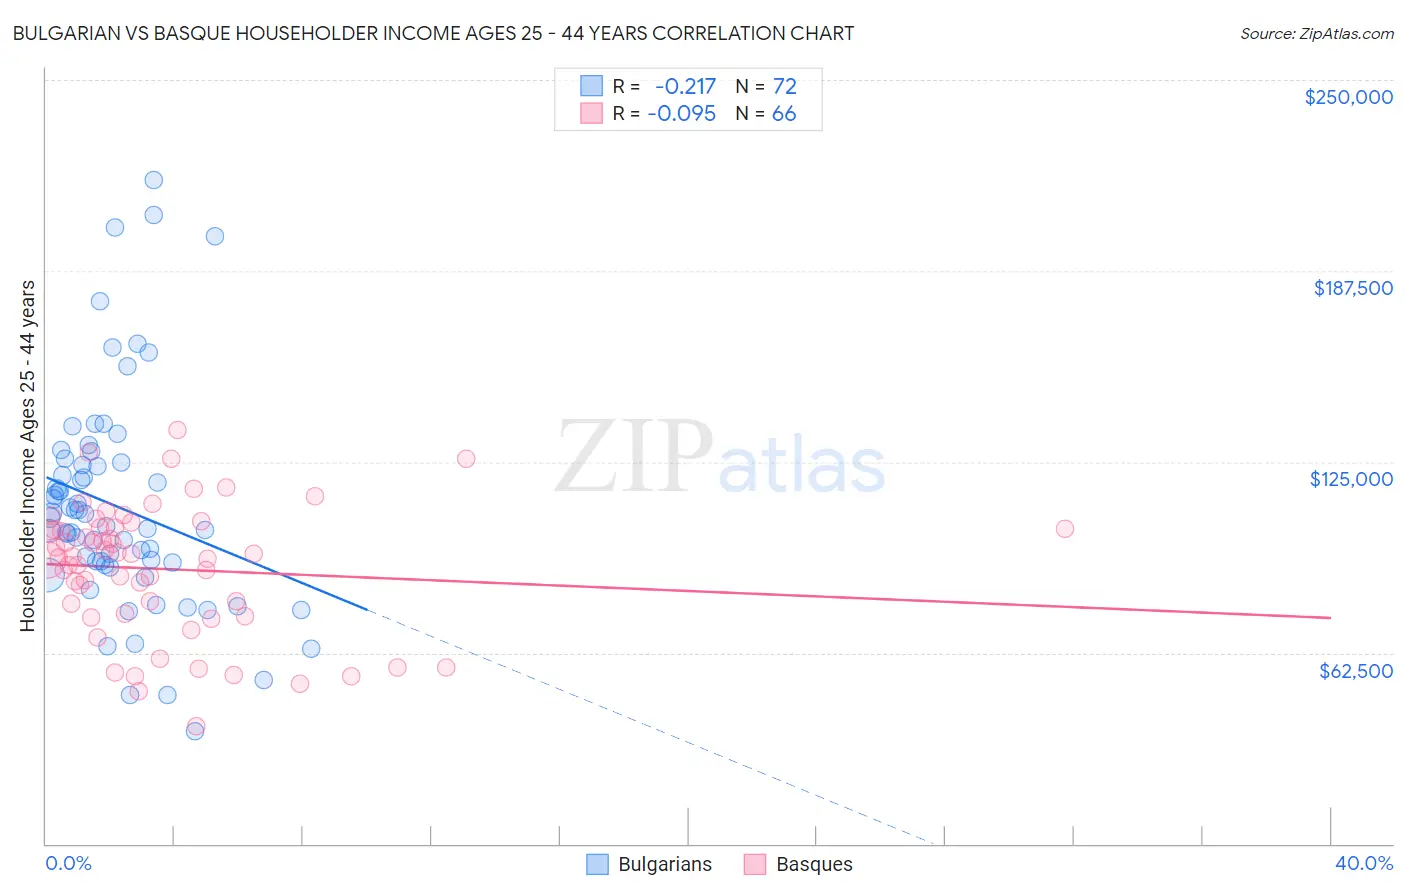 Bulgarian vs Basque Householder Income Ages 25 - 44 years